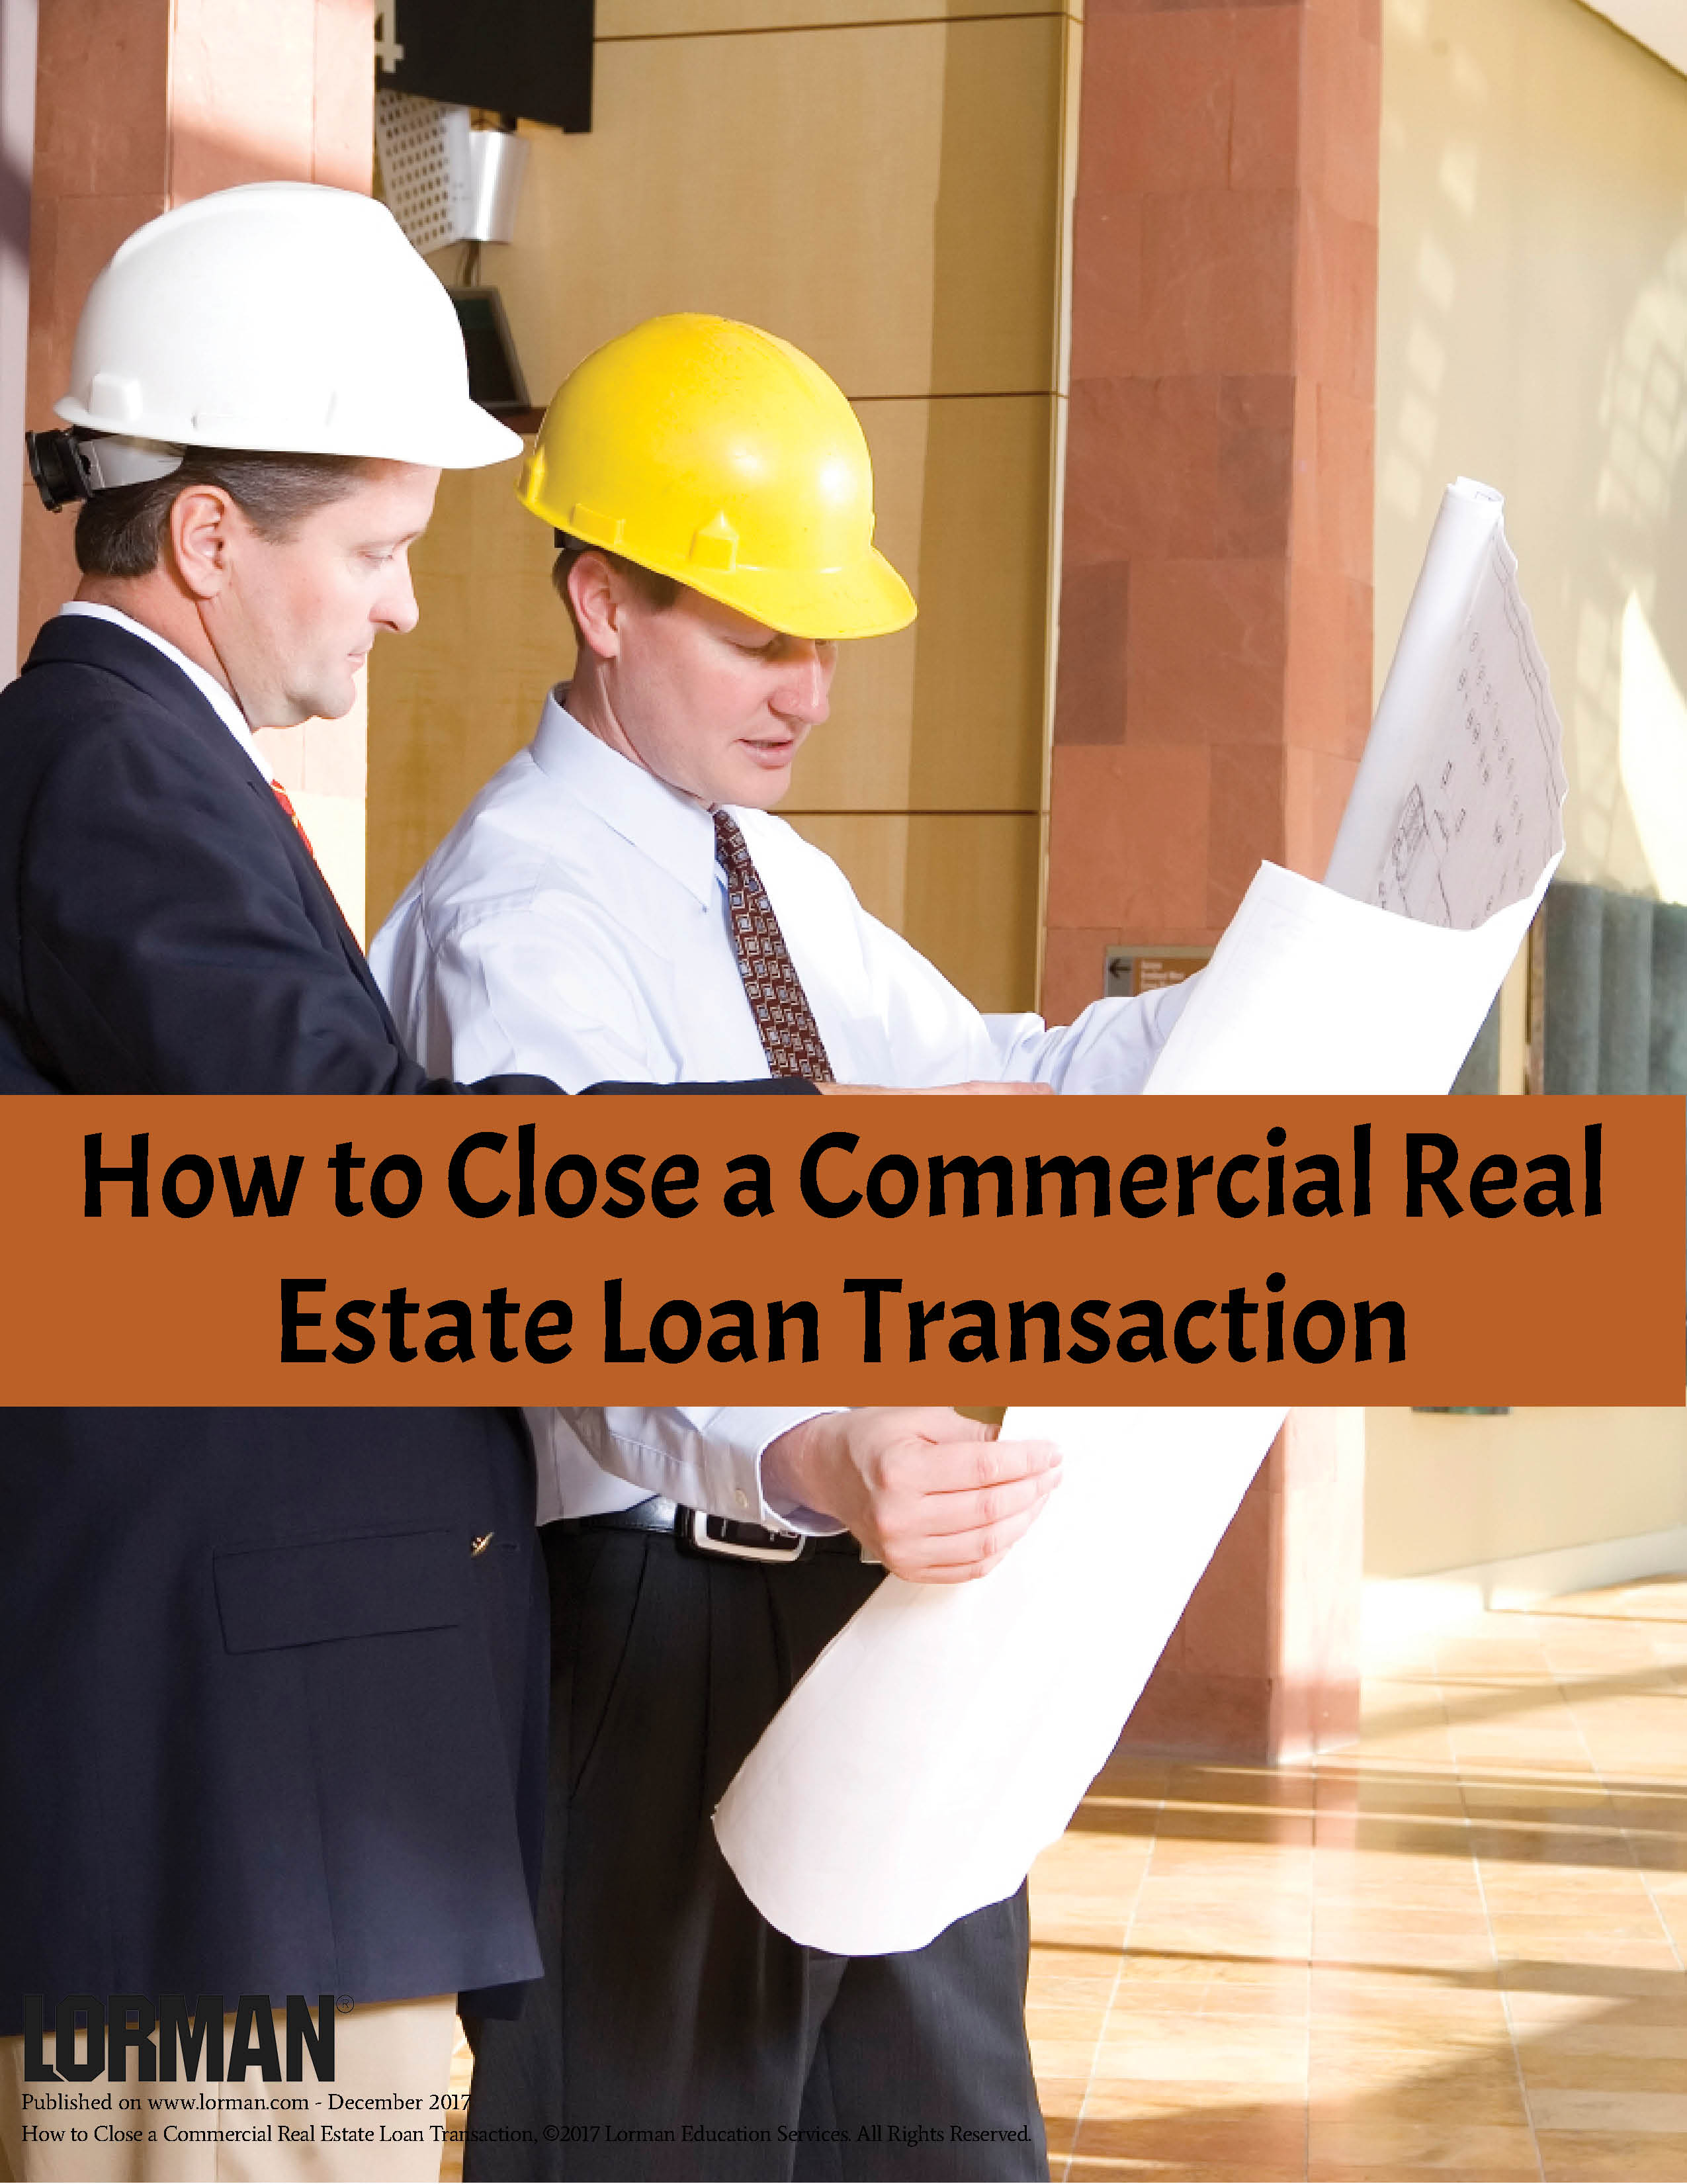 How to Close a Commercial Real Estate Loan Transaction